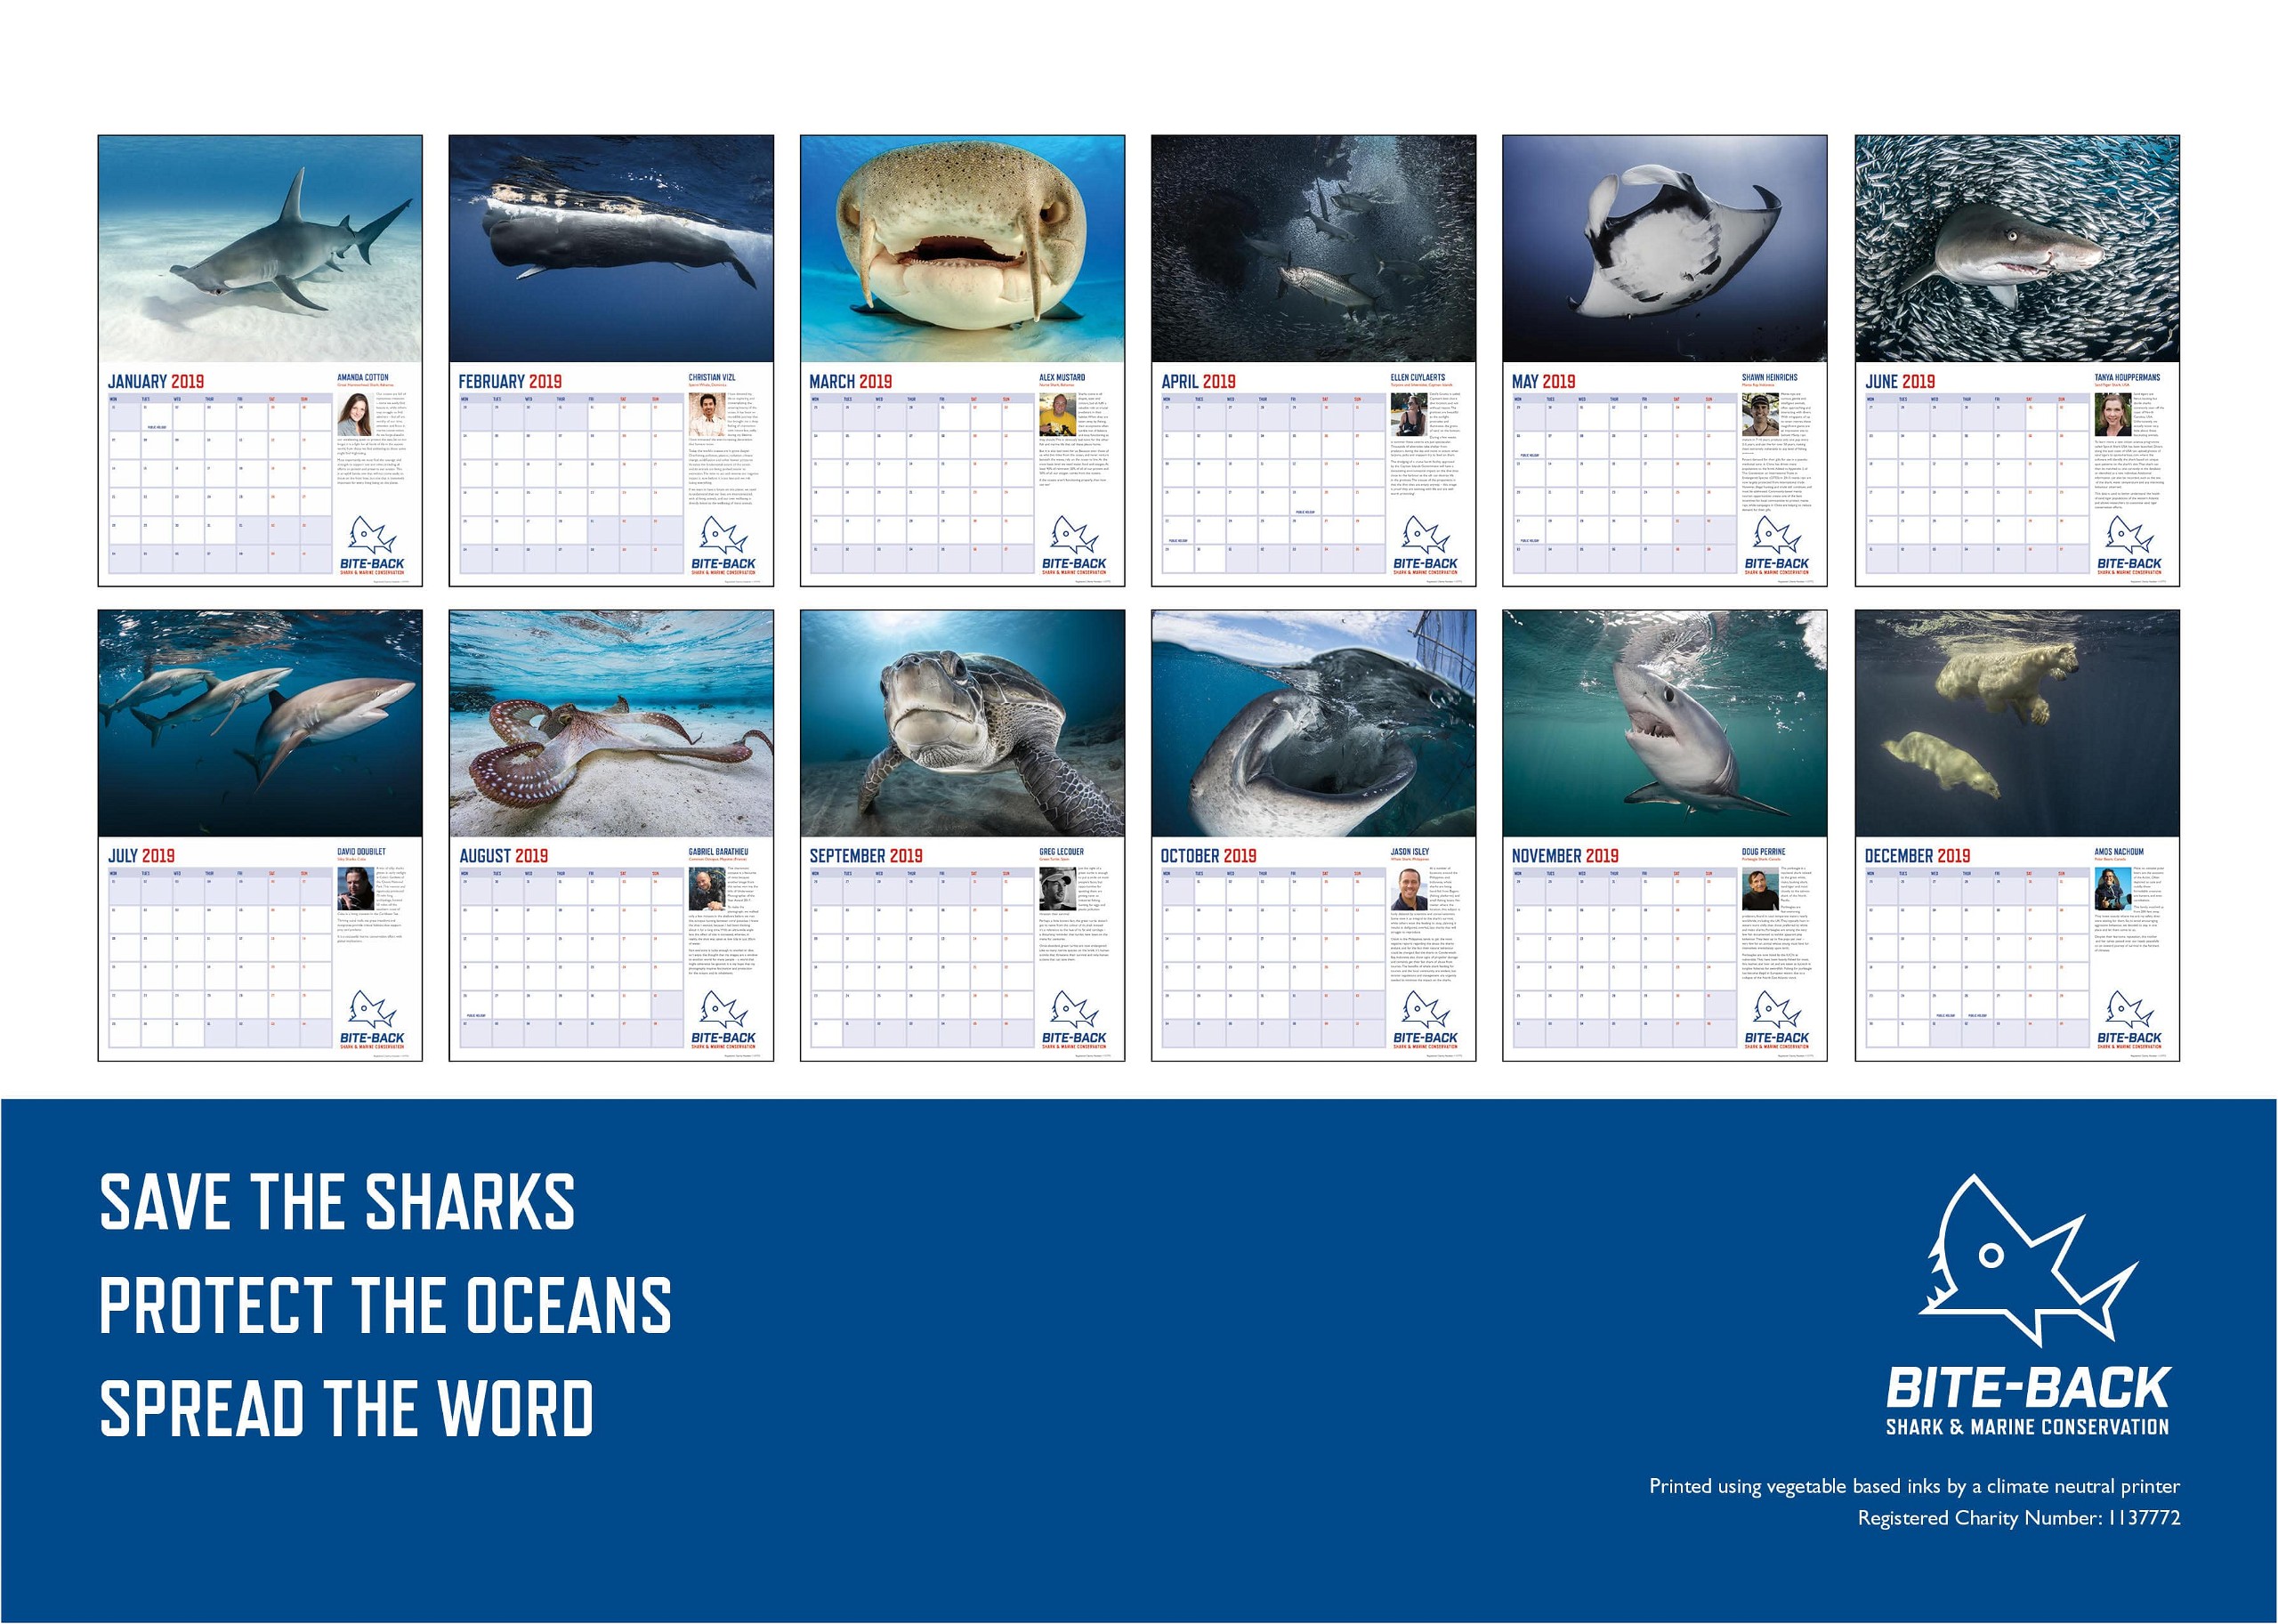 Seas The Day: Photographers Unite In Support Of Shark Charity